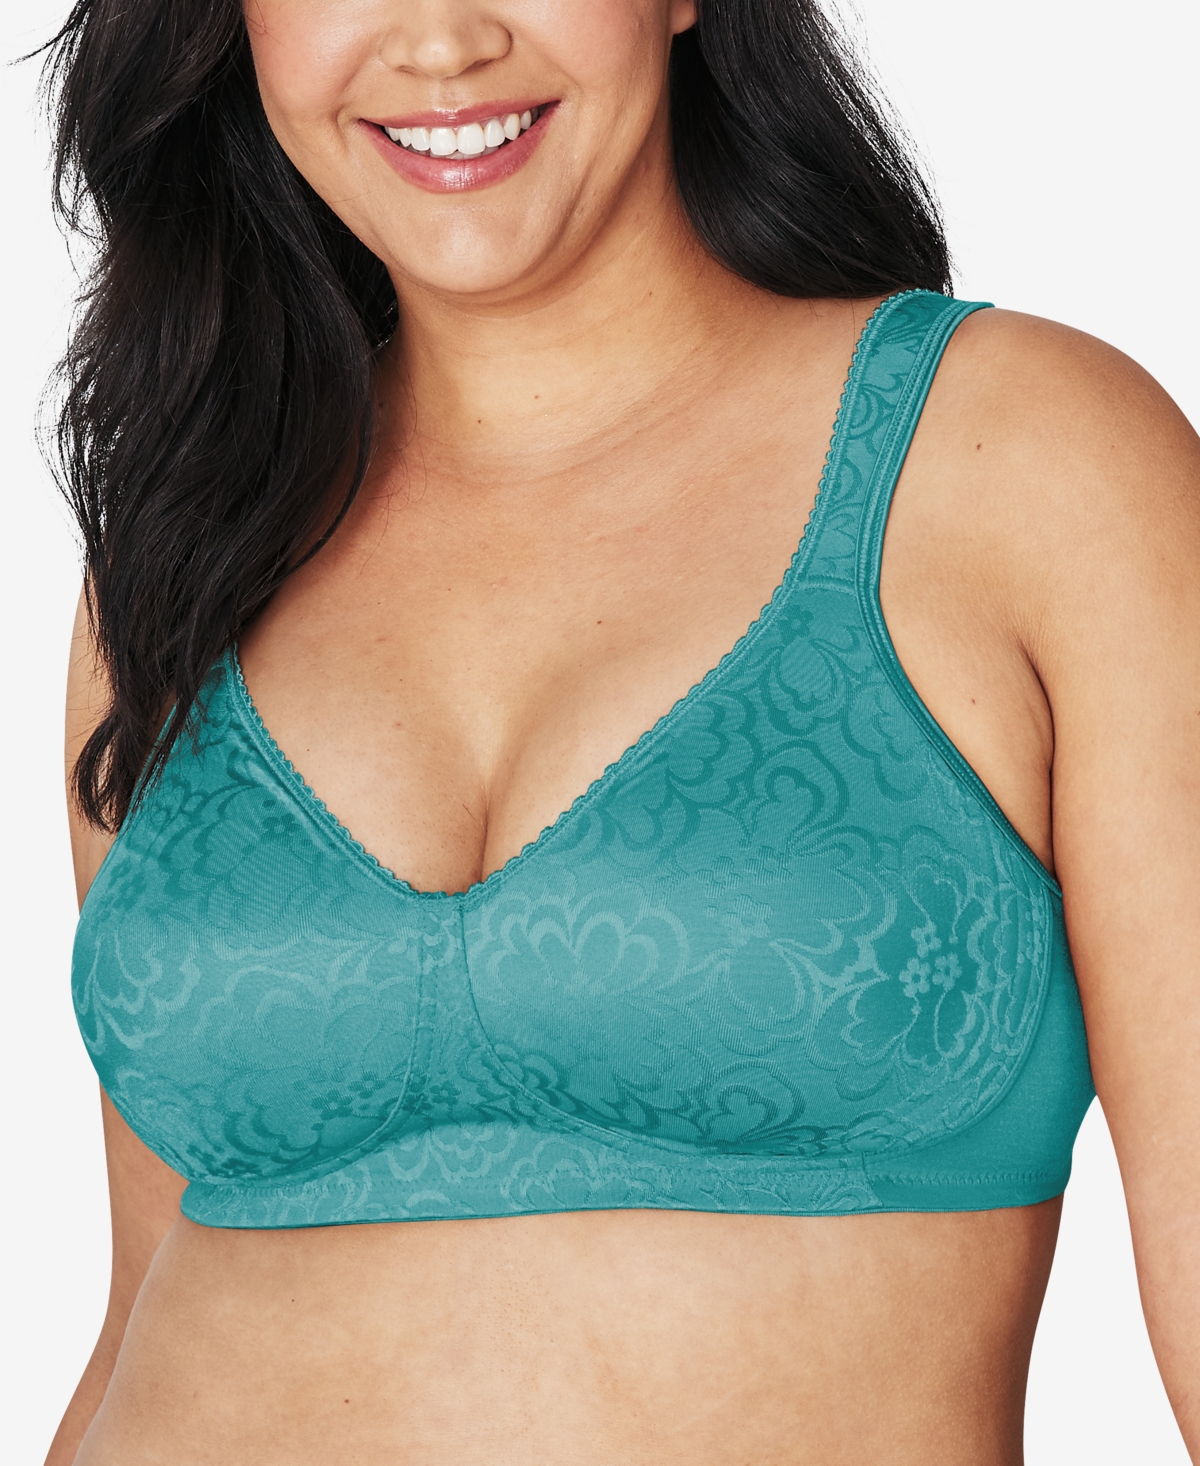 Playtex 18 Hour Ultimate Lift and Support Wireless Bra 4745